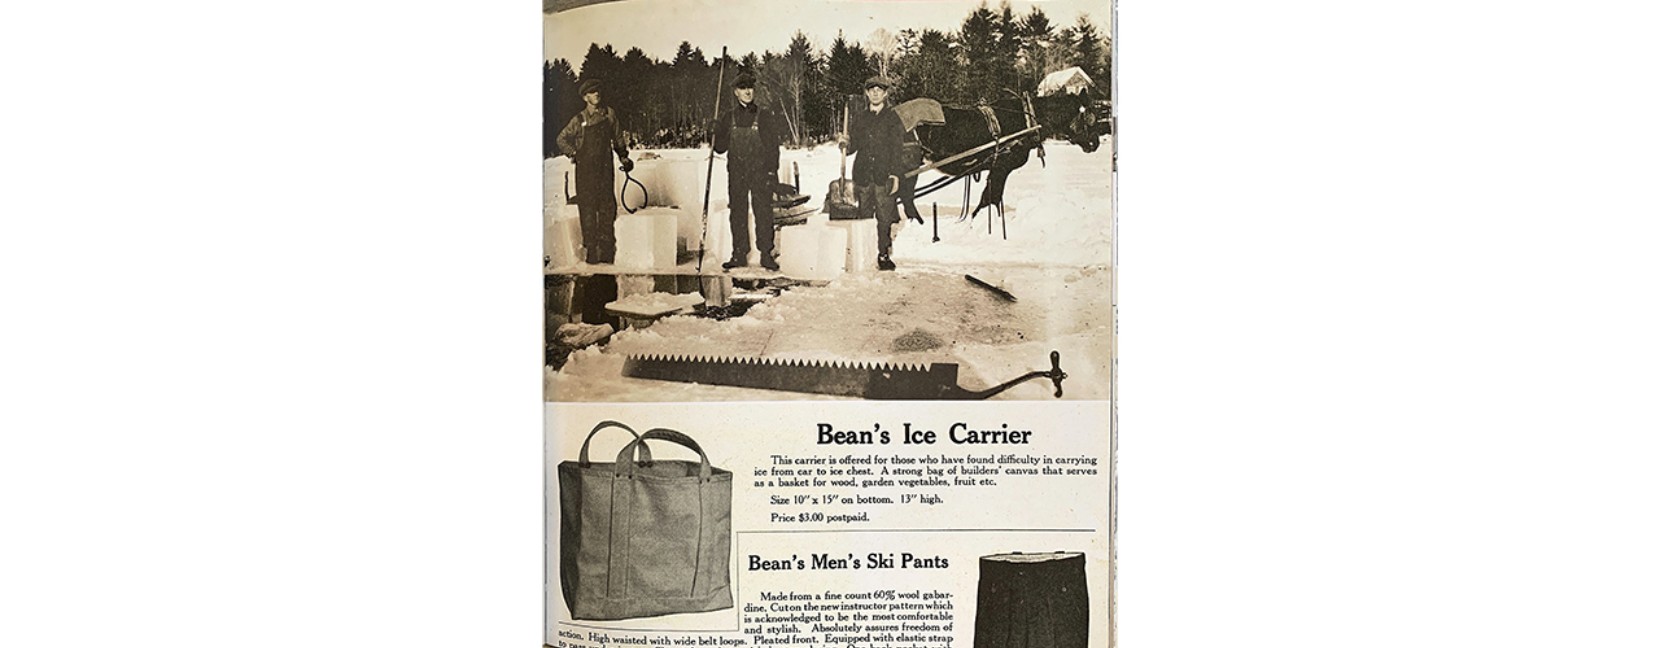 L.L.Bean Ice Carrier as featured in the 1944 Fall Catalog 